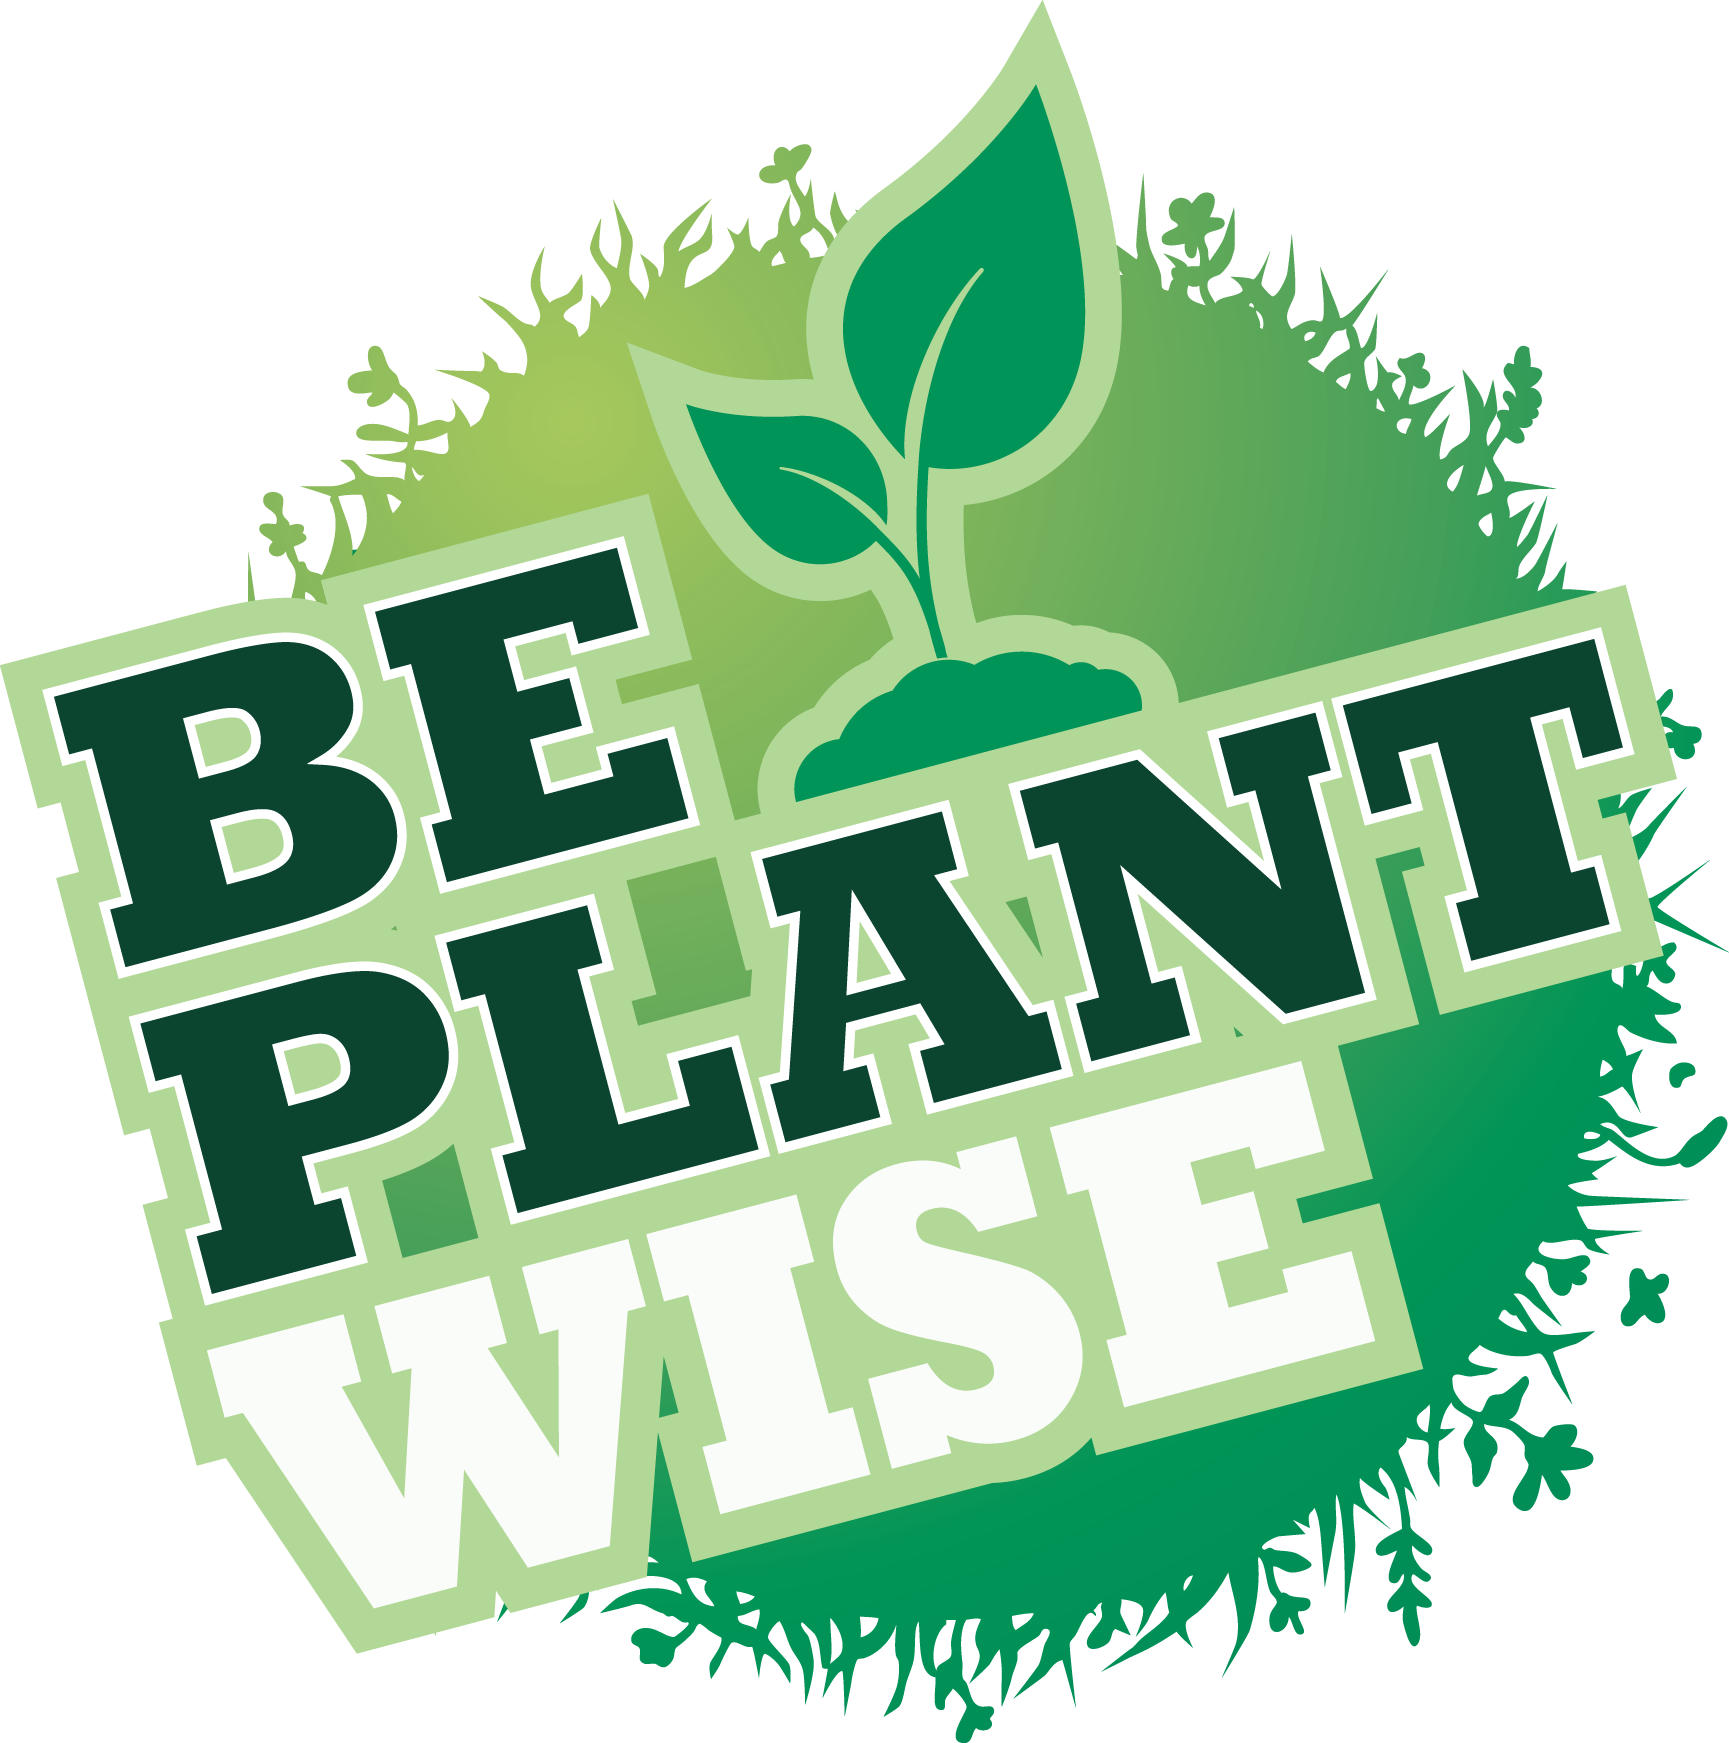 Be Plant wise